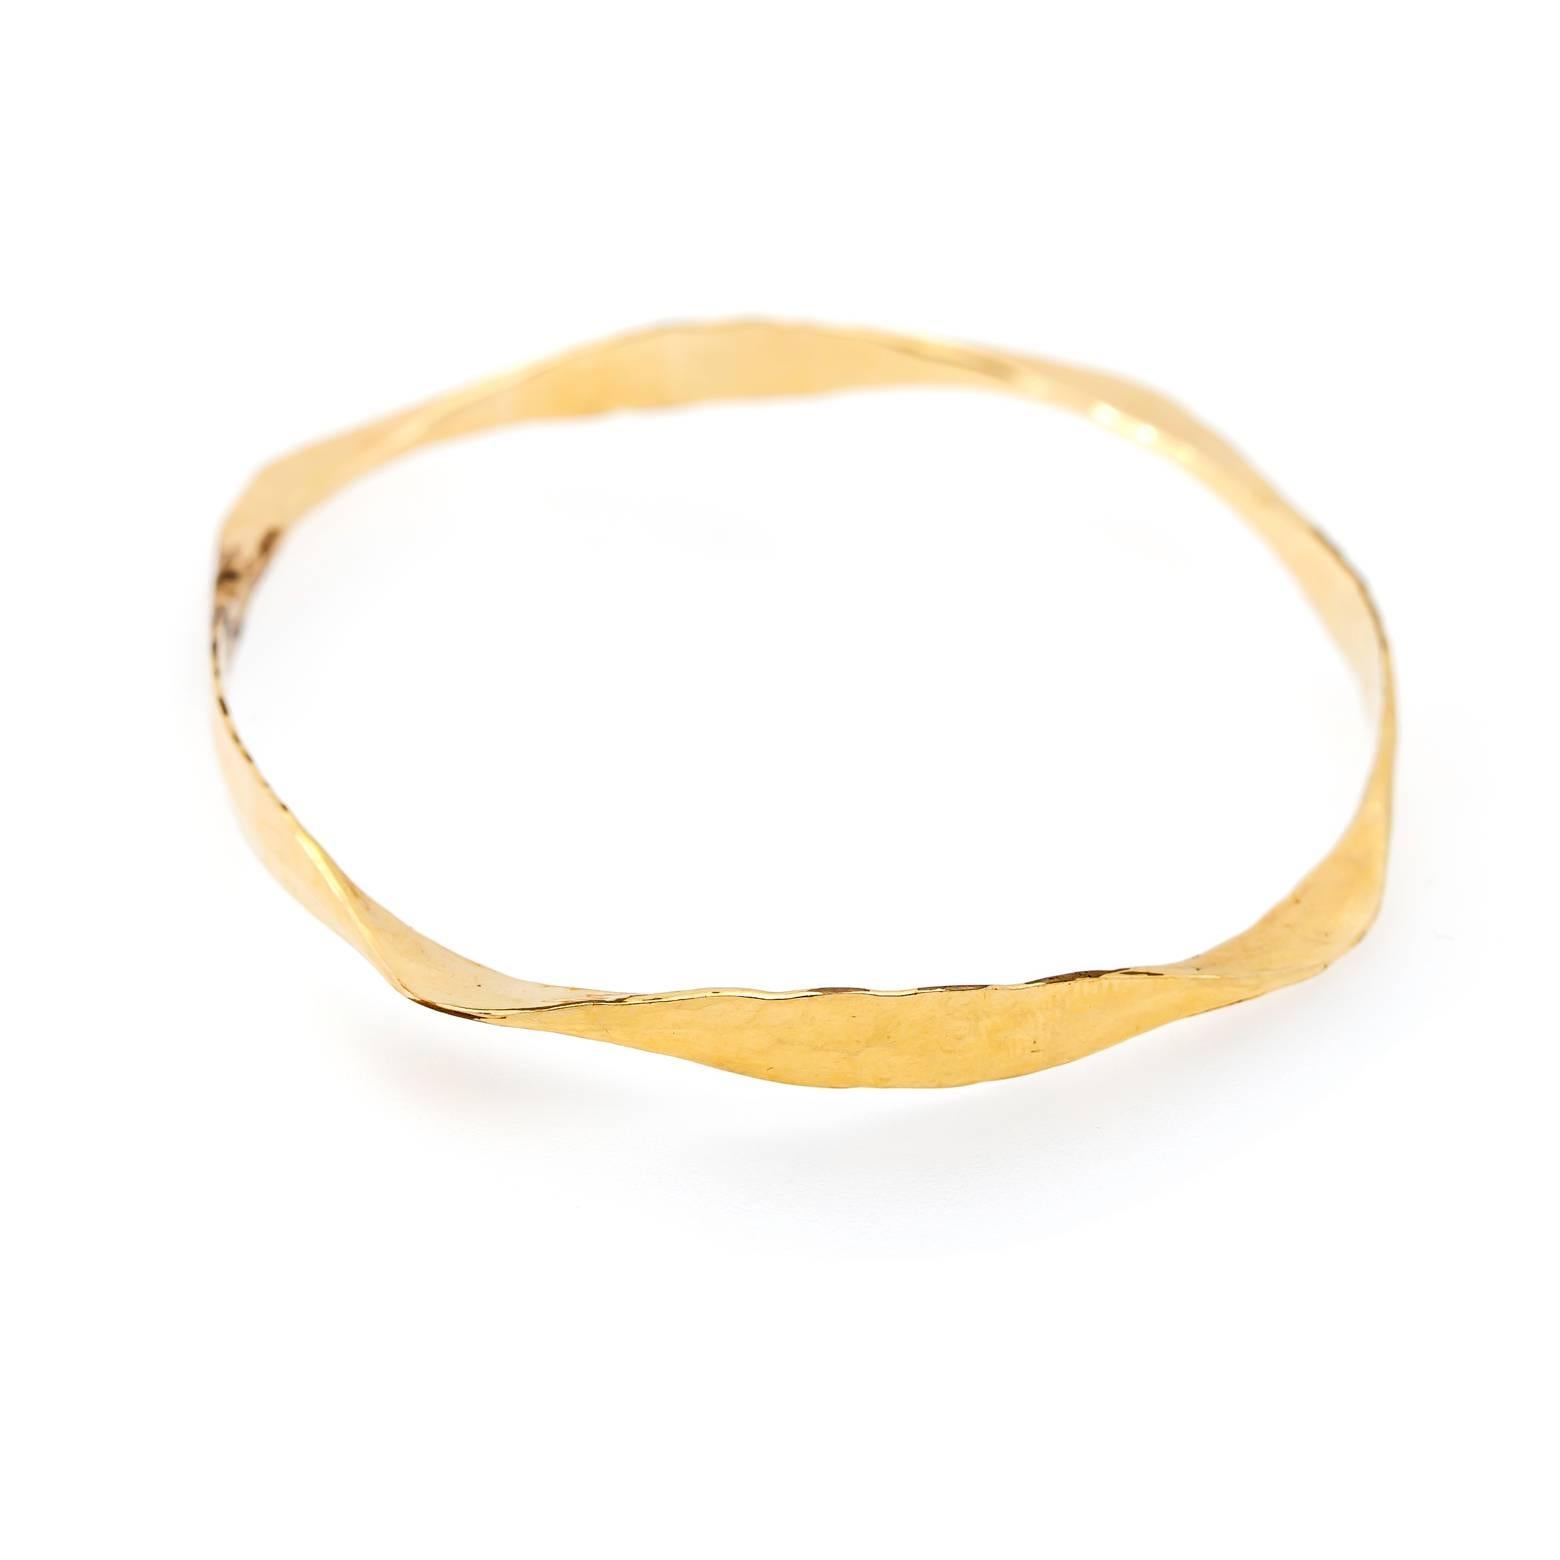 This twisted hammered hand made beauty is a gorgeous bangle with an artistic flare.The hammered detail reflects light and shines bright is yellow gold. Made in our studio in the San Francisco Bay Area. 14K Yellow Gold